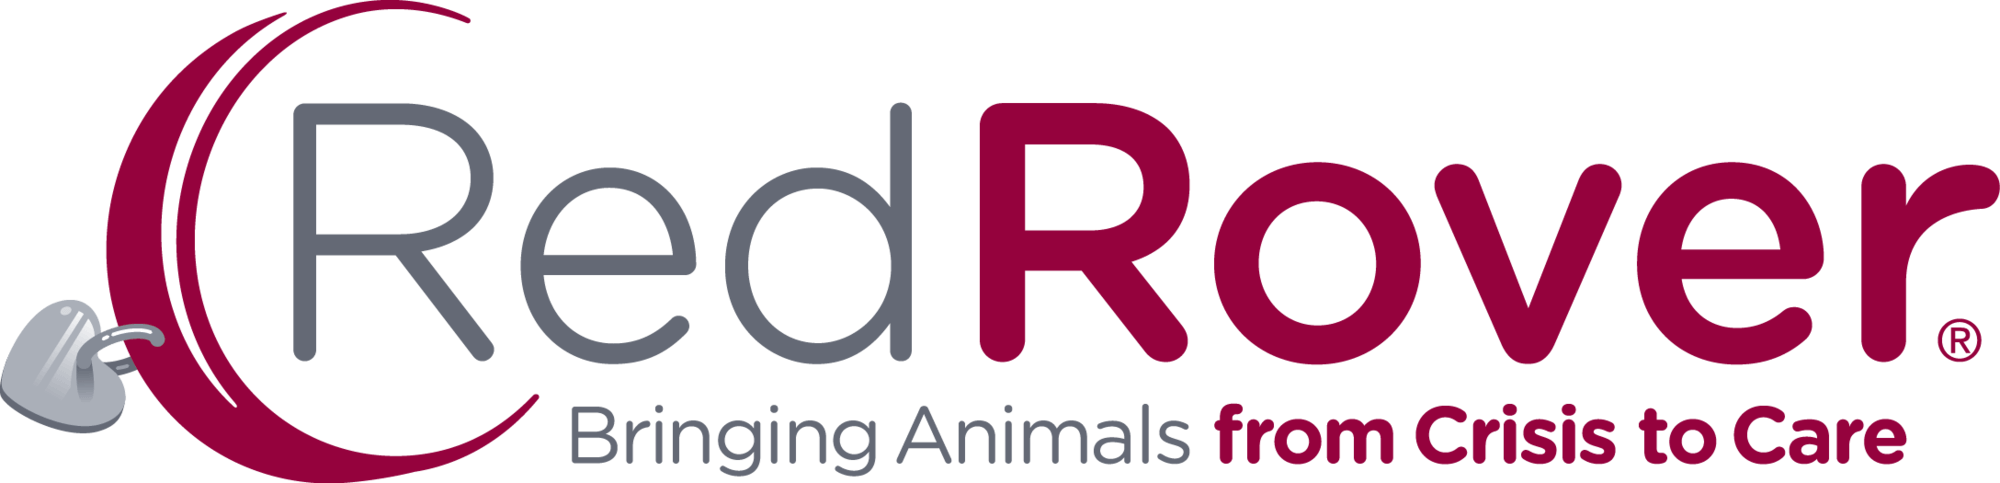 RedRover Bringing Animals from Crisis to Care